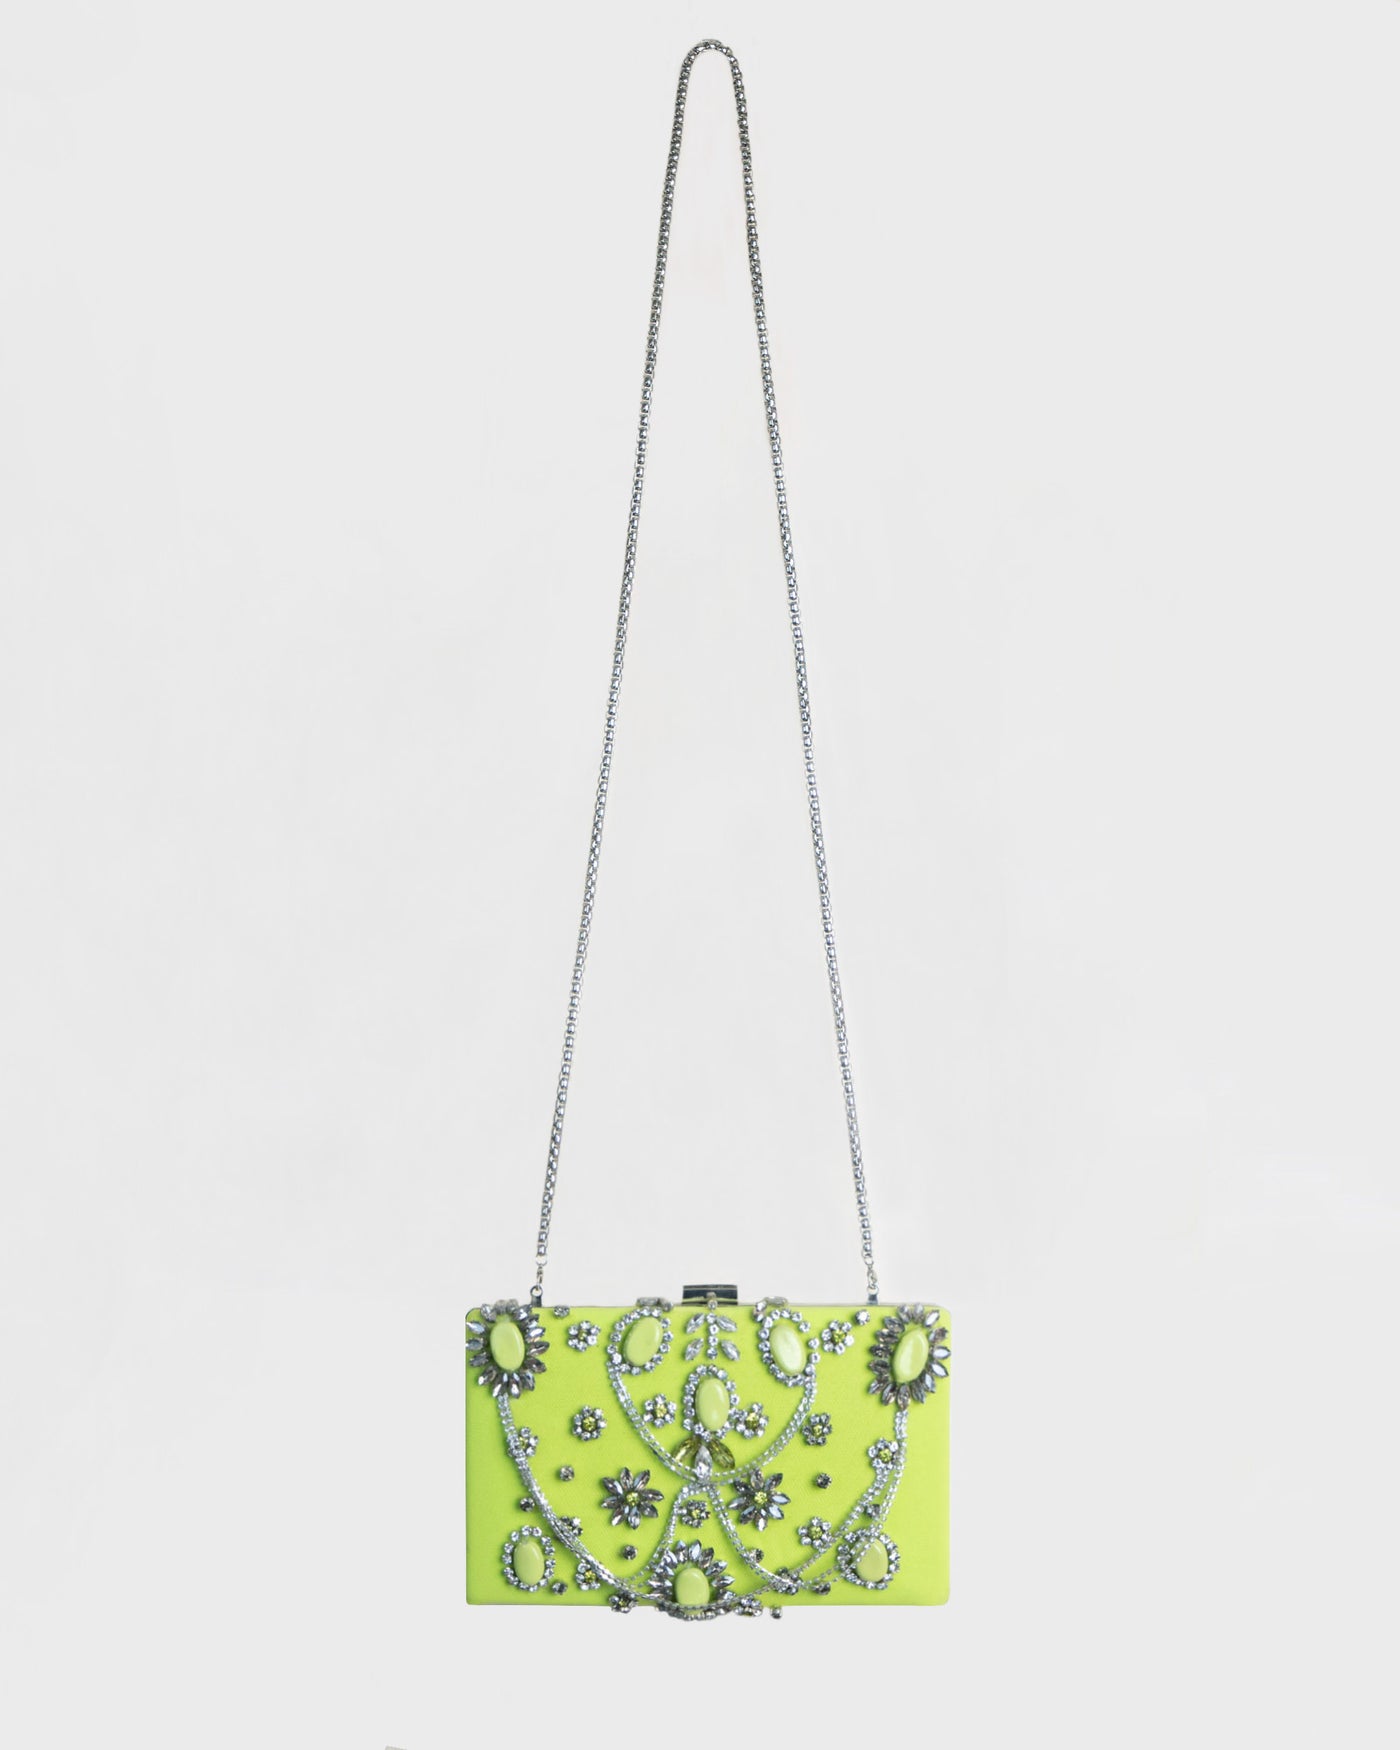 Bejeweled Lime Clutch